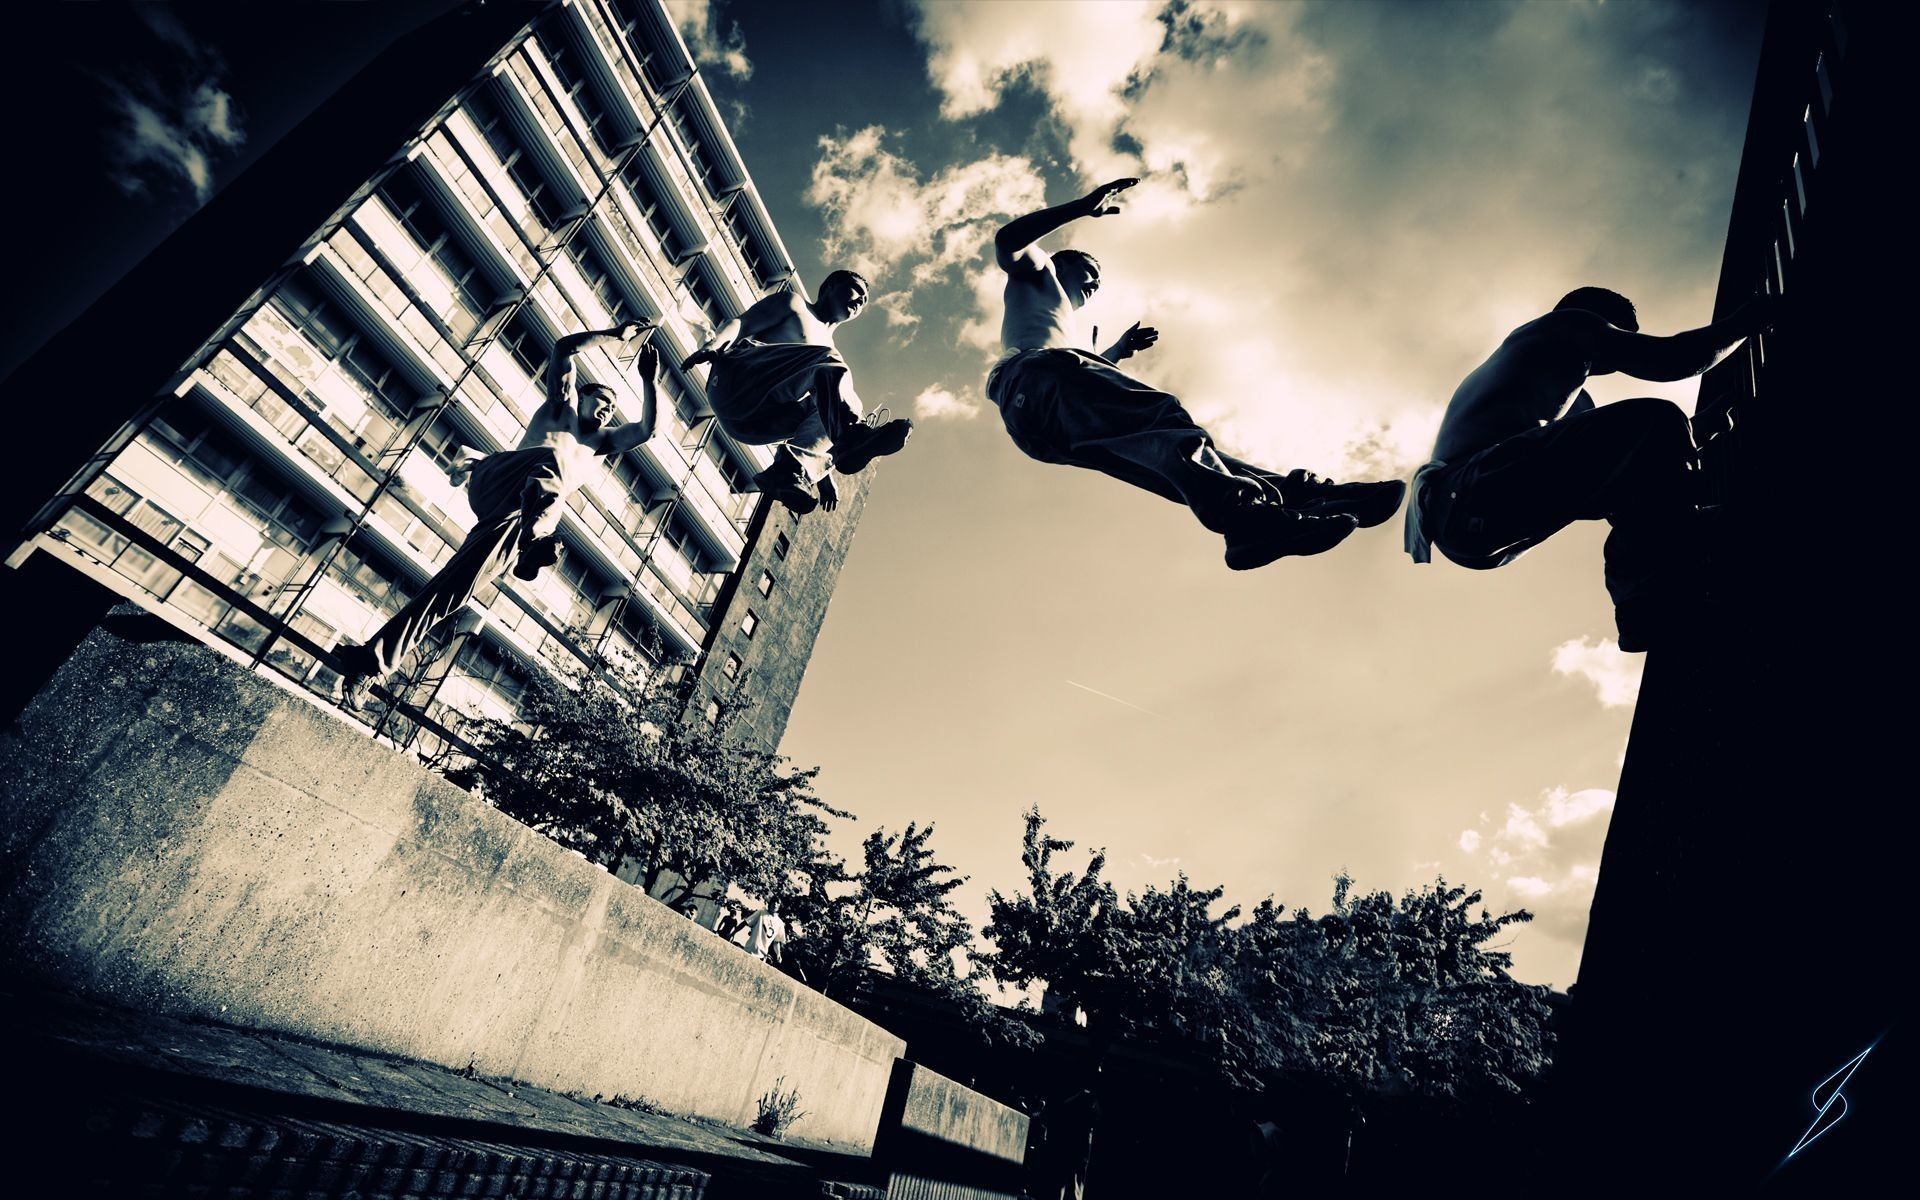 Freerunning: Monochrome parkour, Freedom of thought, Stylistic acrobatics. 1920x1200 HD Background.